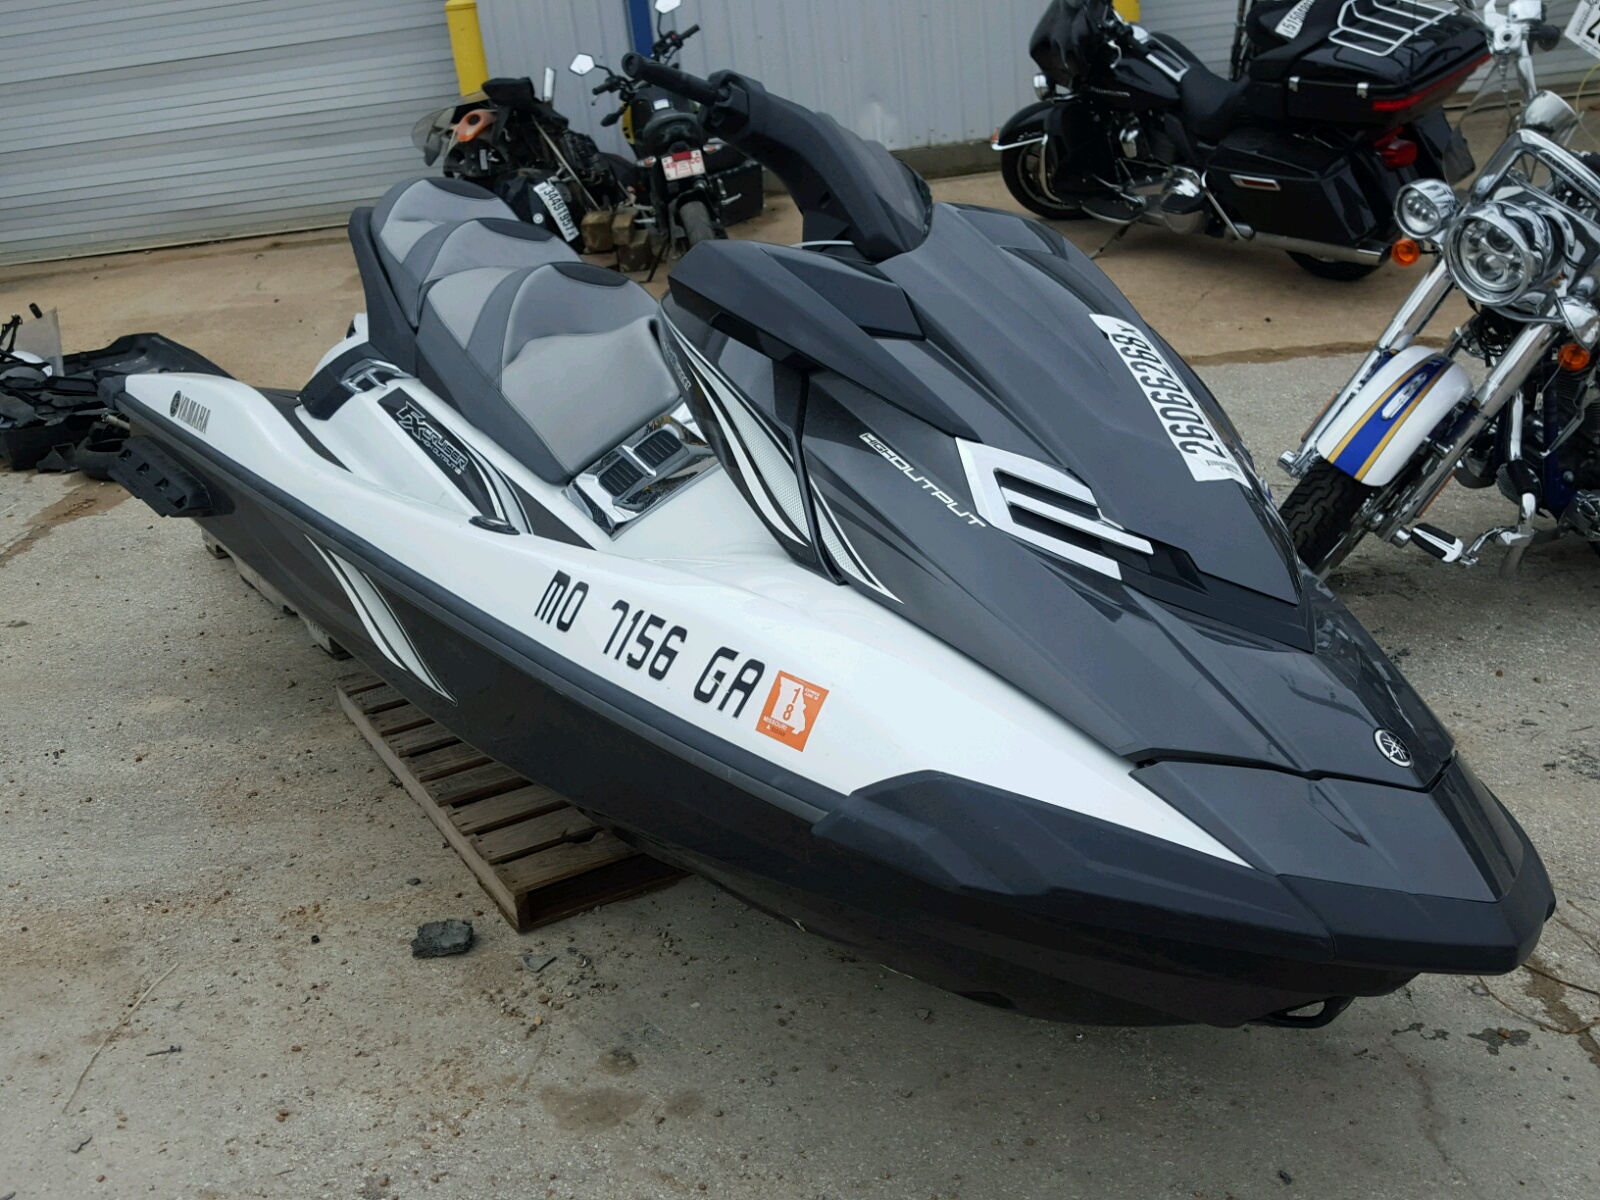 Salvaged Jet Skis for Auction - AutoBidMaster